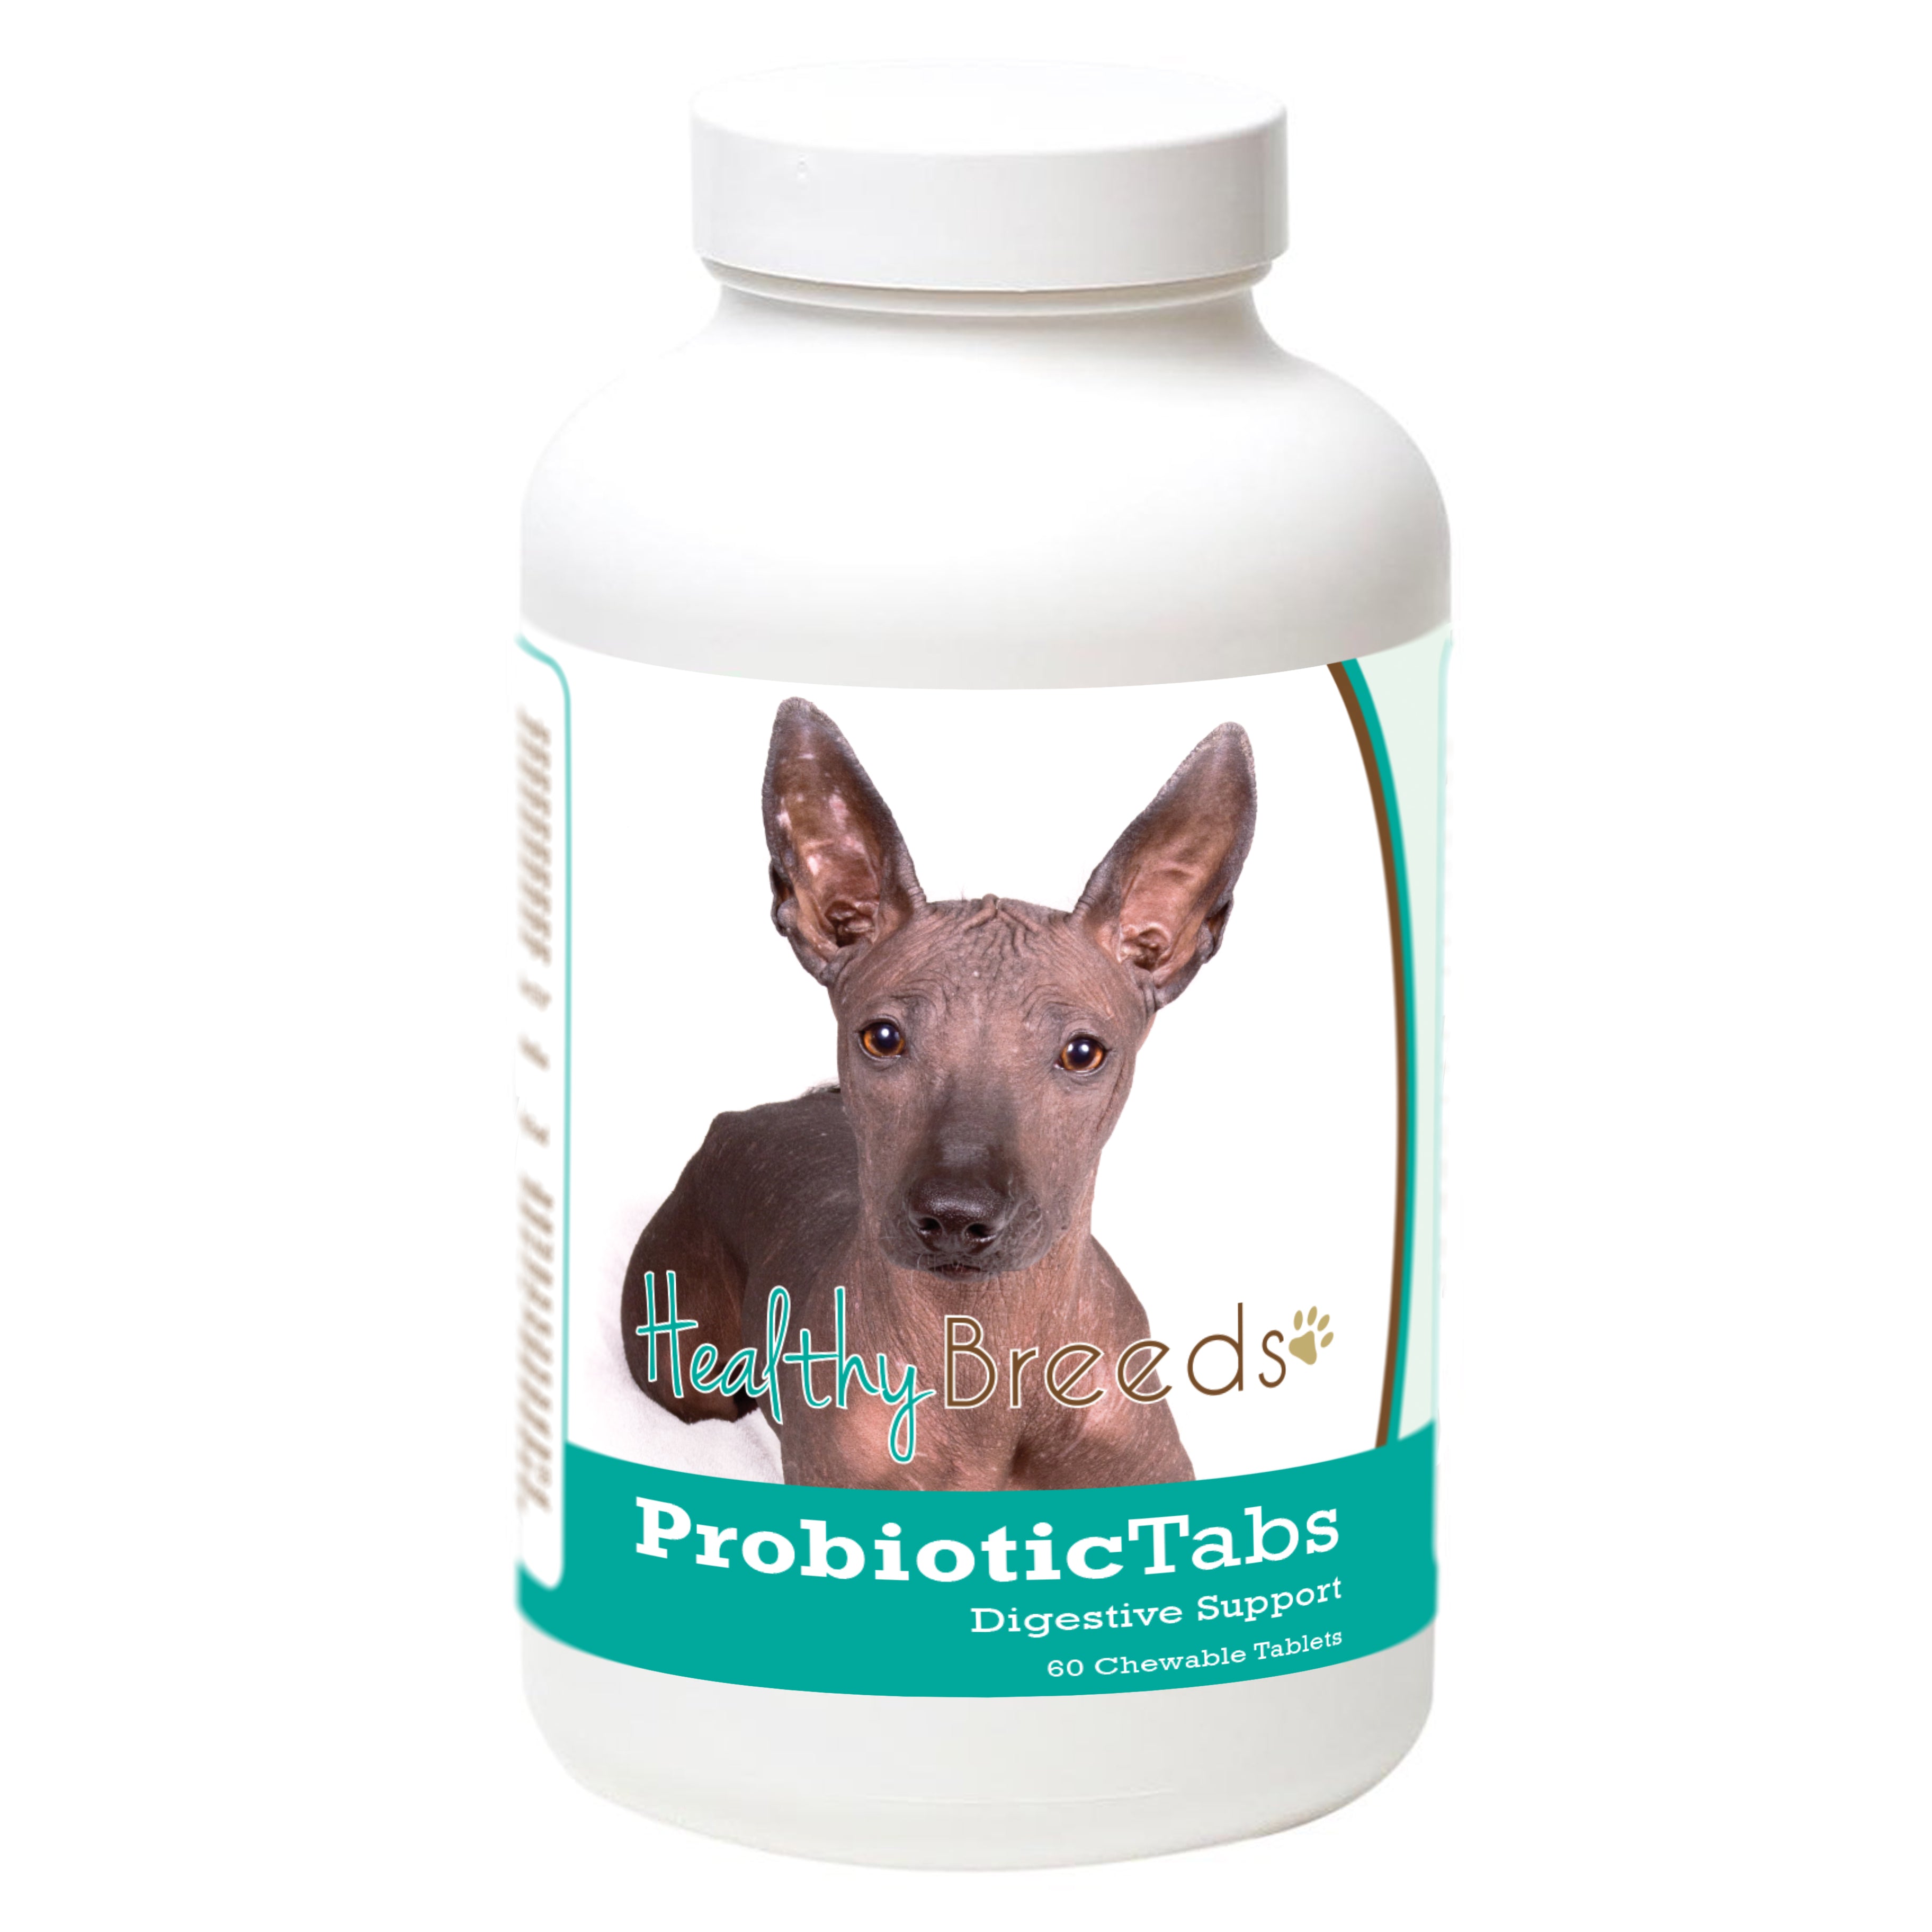 Xoloitzcuintli Probiotic and Digestive Support for Dogs 60 Count